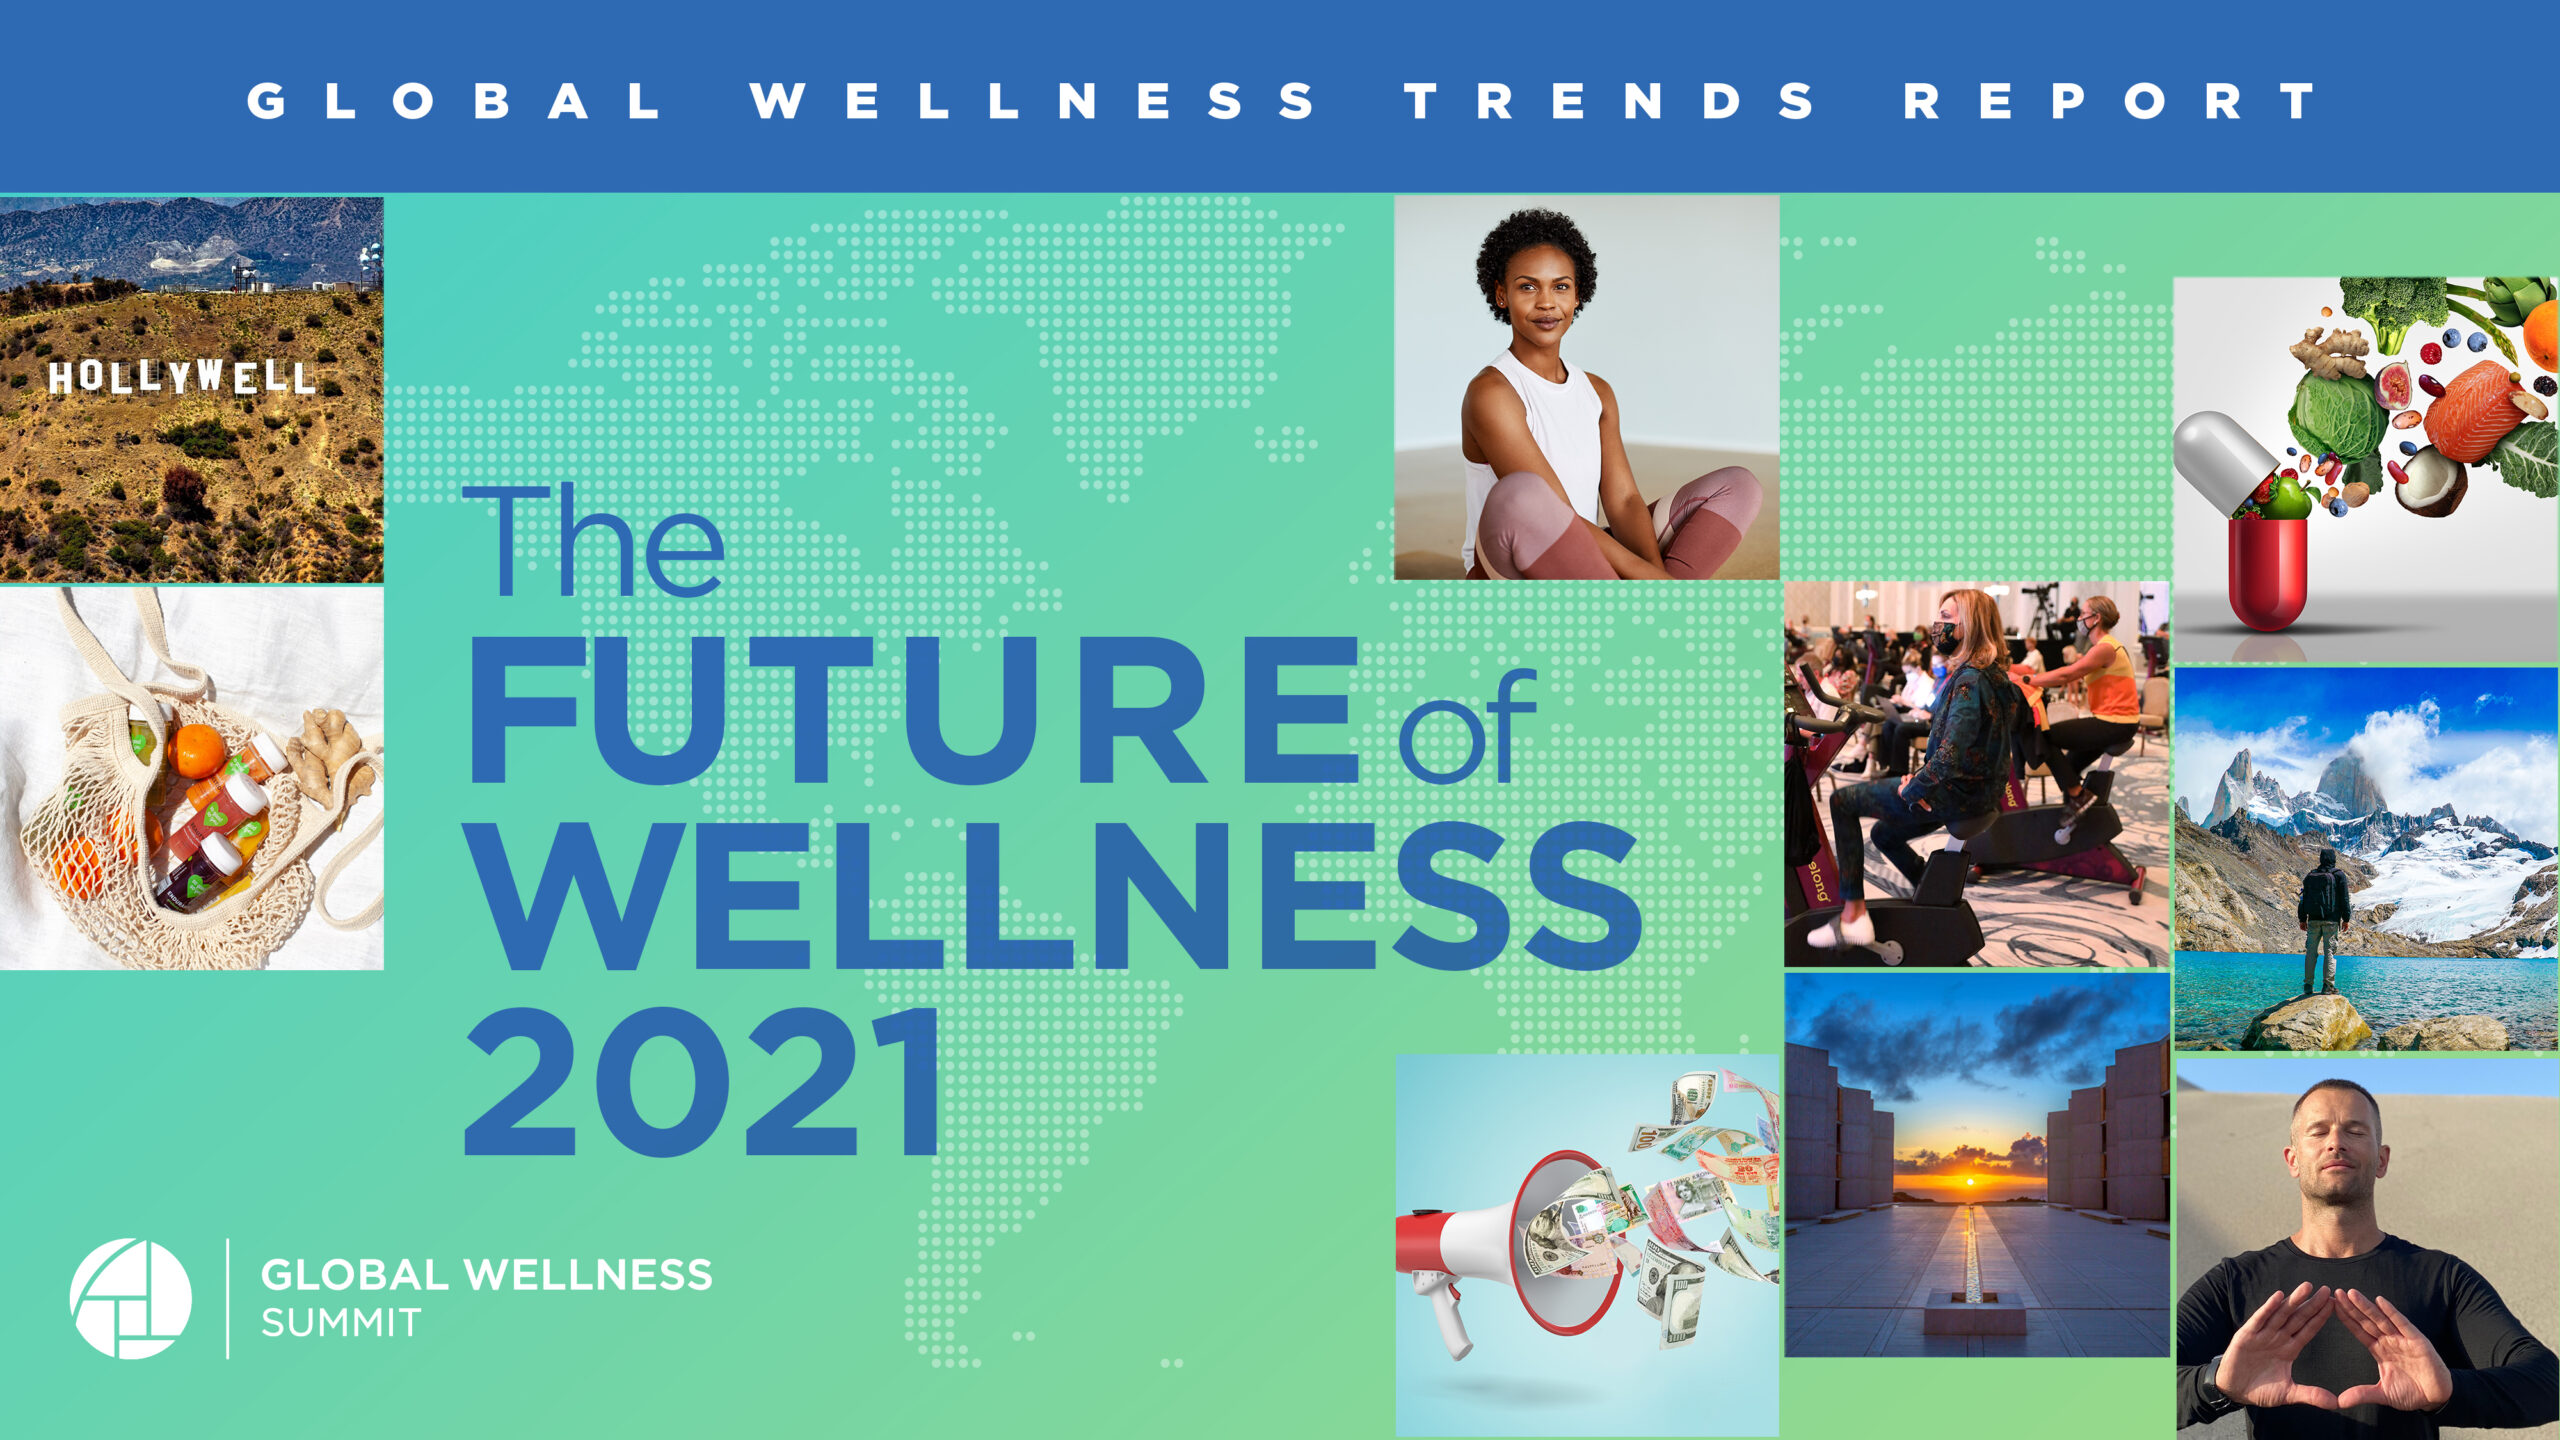 GWS Releases InDepth Trends Report, “The Future of Wellness 2021